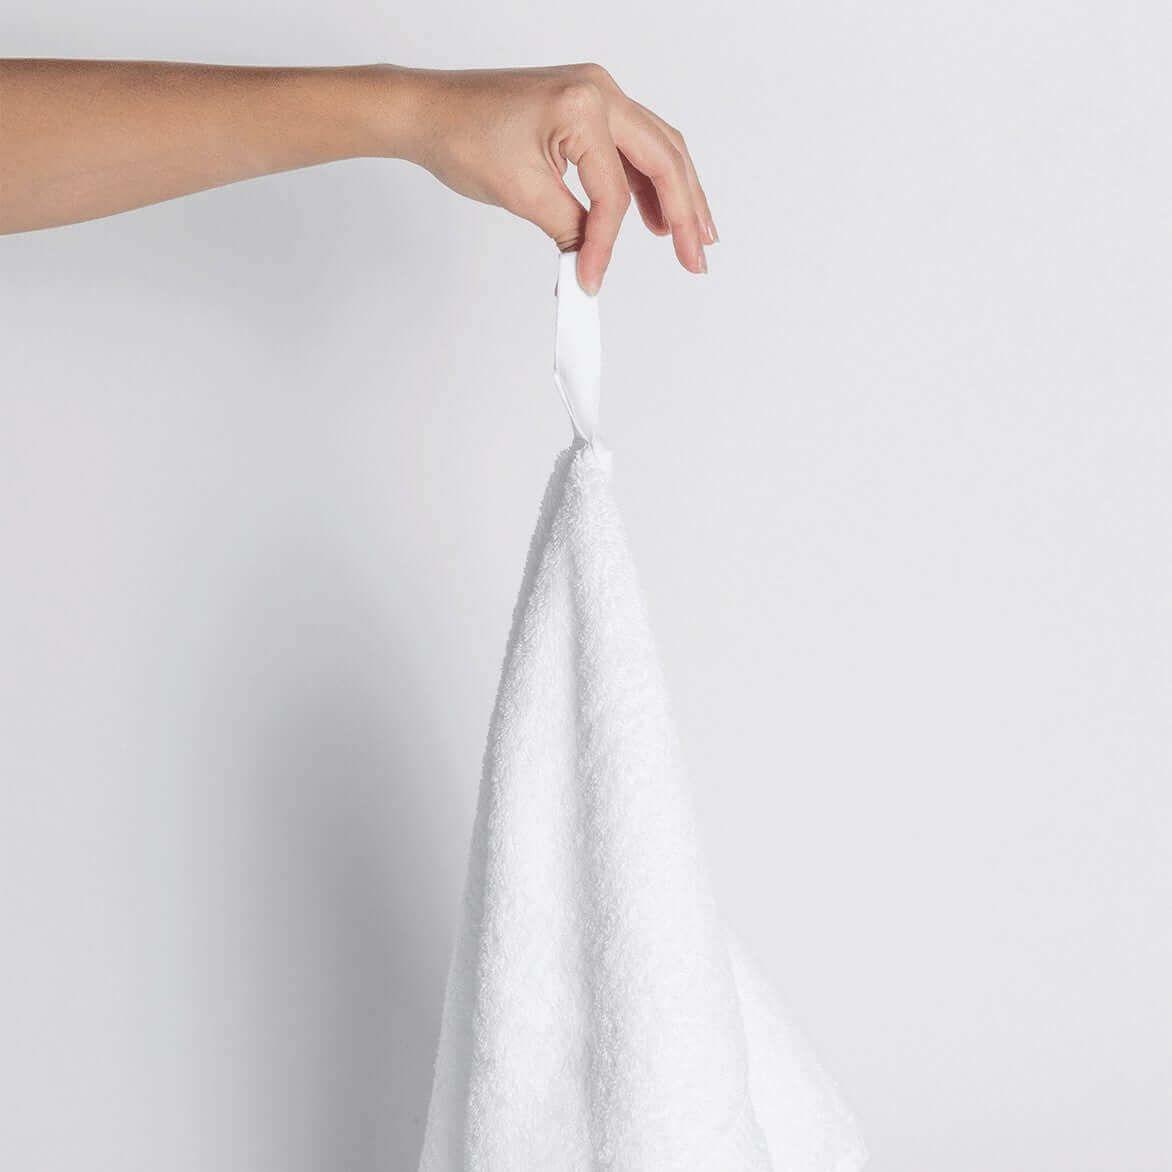 Nebia Hand Towel - front view of hand holding towel